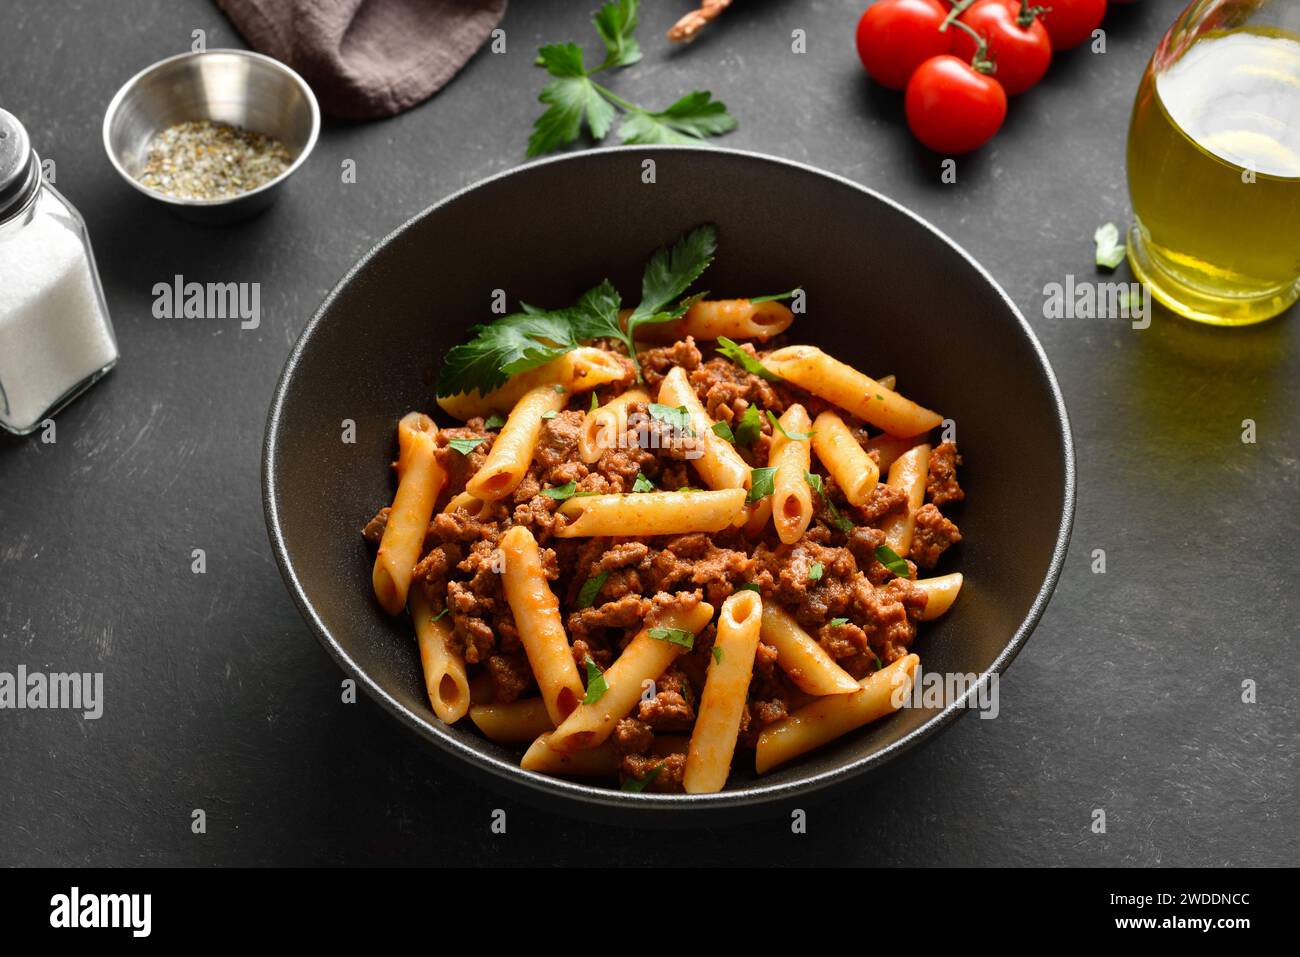 Penne pasta with minced meat, tomato sauce and greens in black ceramic bowl over dark stone background. Bowl of pasta bolognese. Close up view Stock Photo